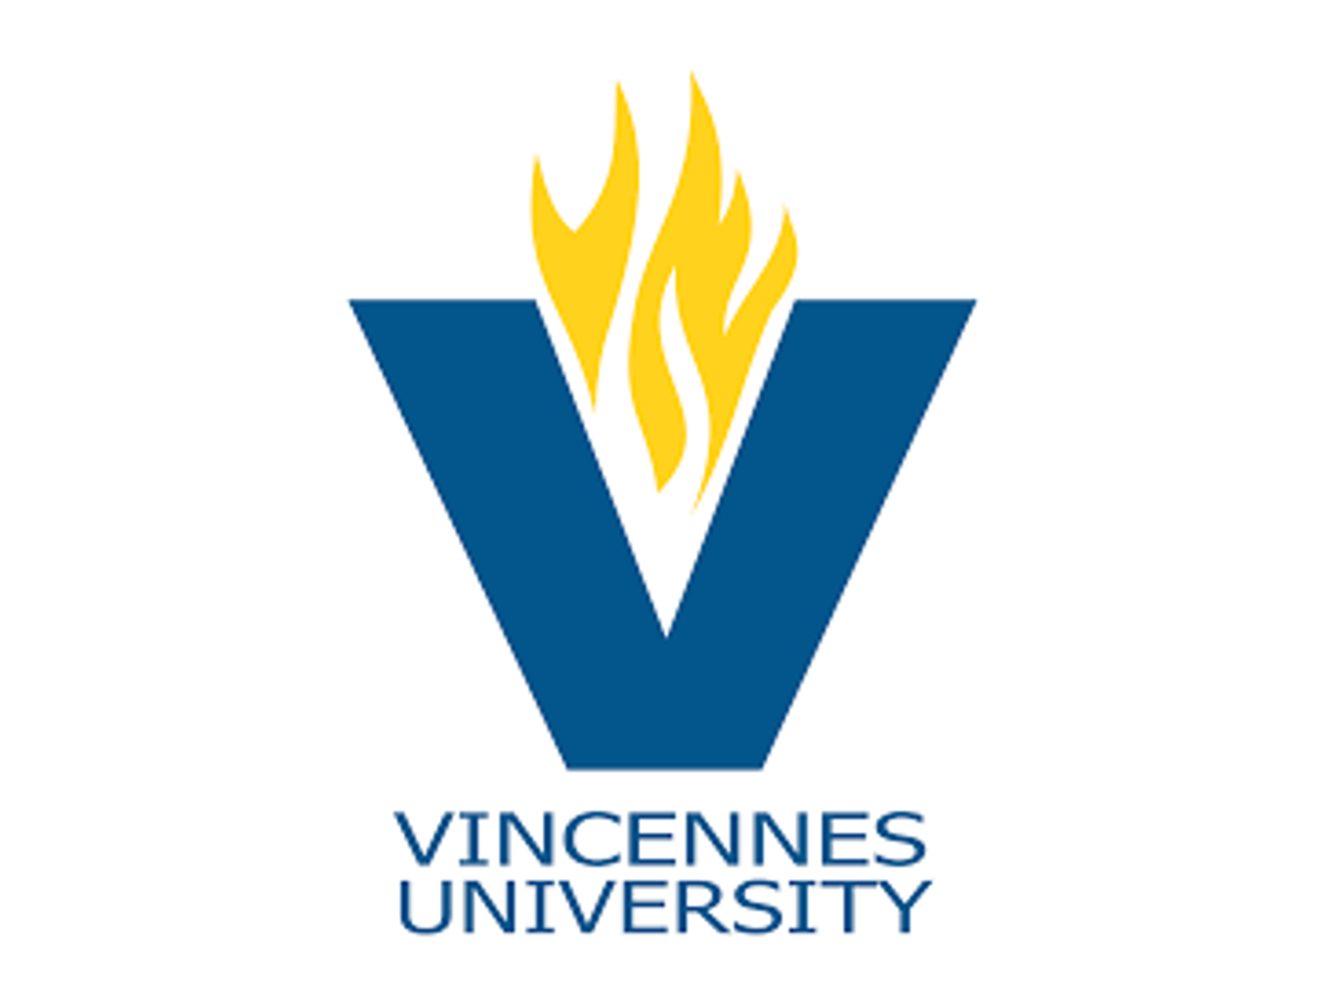 Vincennes University will be holding a Health Career Fair on October 24.